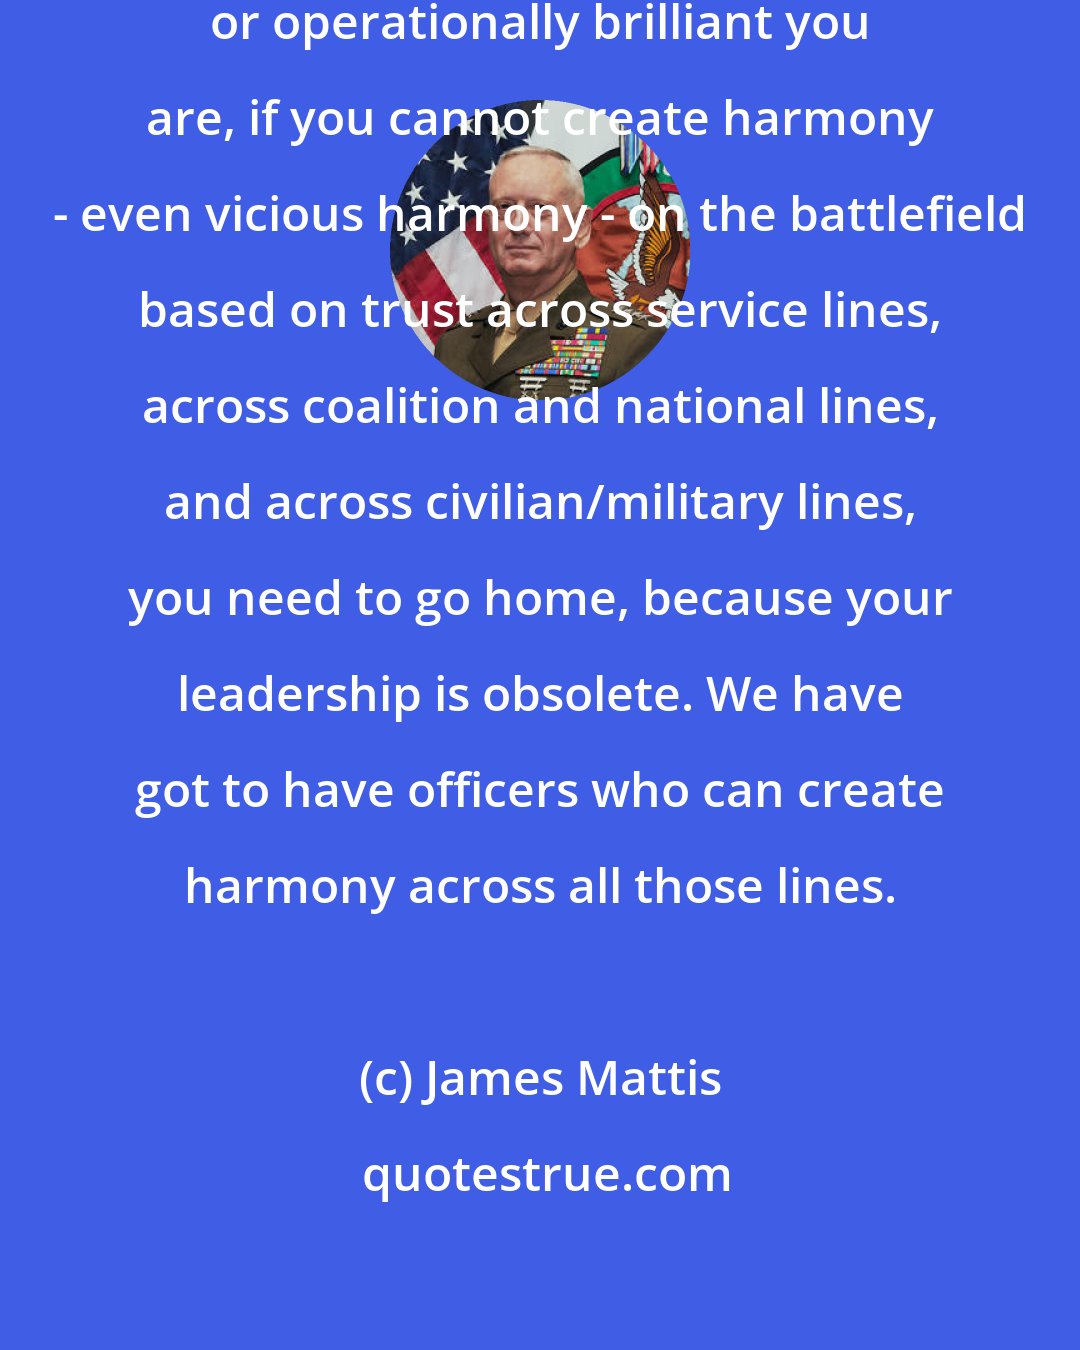 James Mattis: In this age, I don't care how tactically or operationally brilliant you are, if you cannot create harmony - even vicious harmony - on the battlefield based on trust across service lines, across coalition and national lines, and across civilian/military lines, you need to go home, because your leadership is obsolete. We have got to have officers who can create harmony across all those lines.